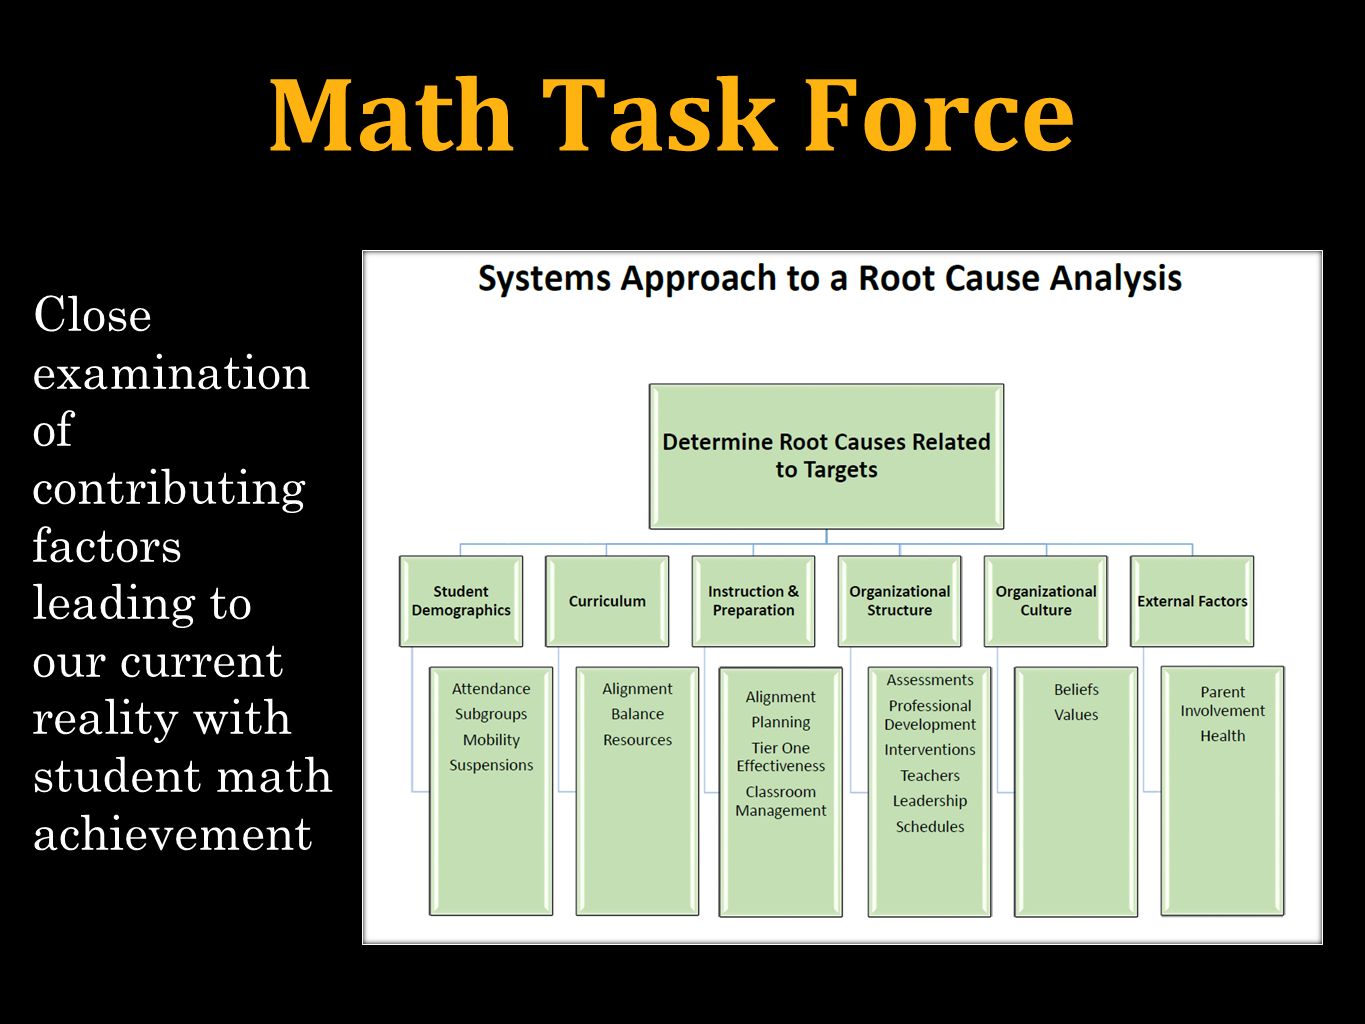 Math Task Force Close examination of contributing factors leading to our current reality with student math achievement